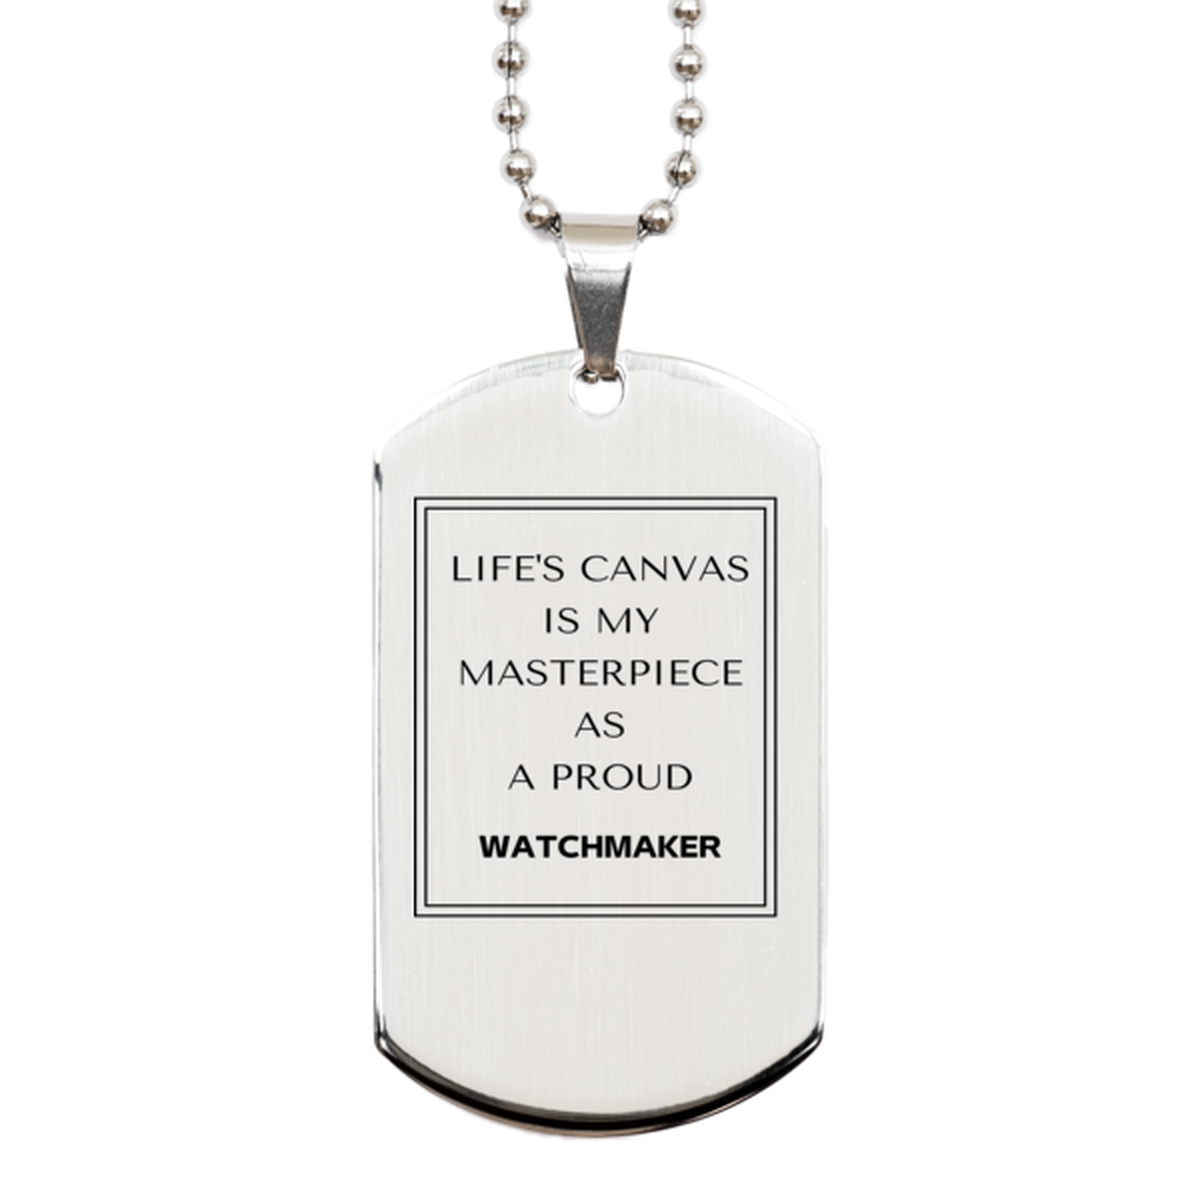 Proud Watchmaker Gifts, Life's canvas is my masterpiece, Epic Birthday Christmas Unique Silver Dog Tag For Watchmaker, Coworkers, Men, Women, Friends